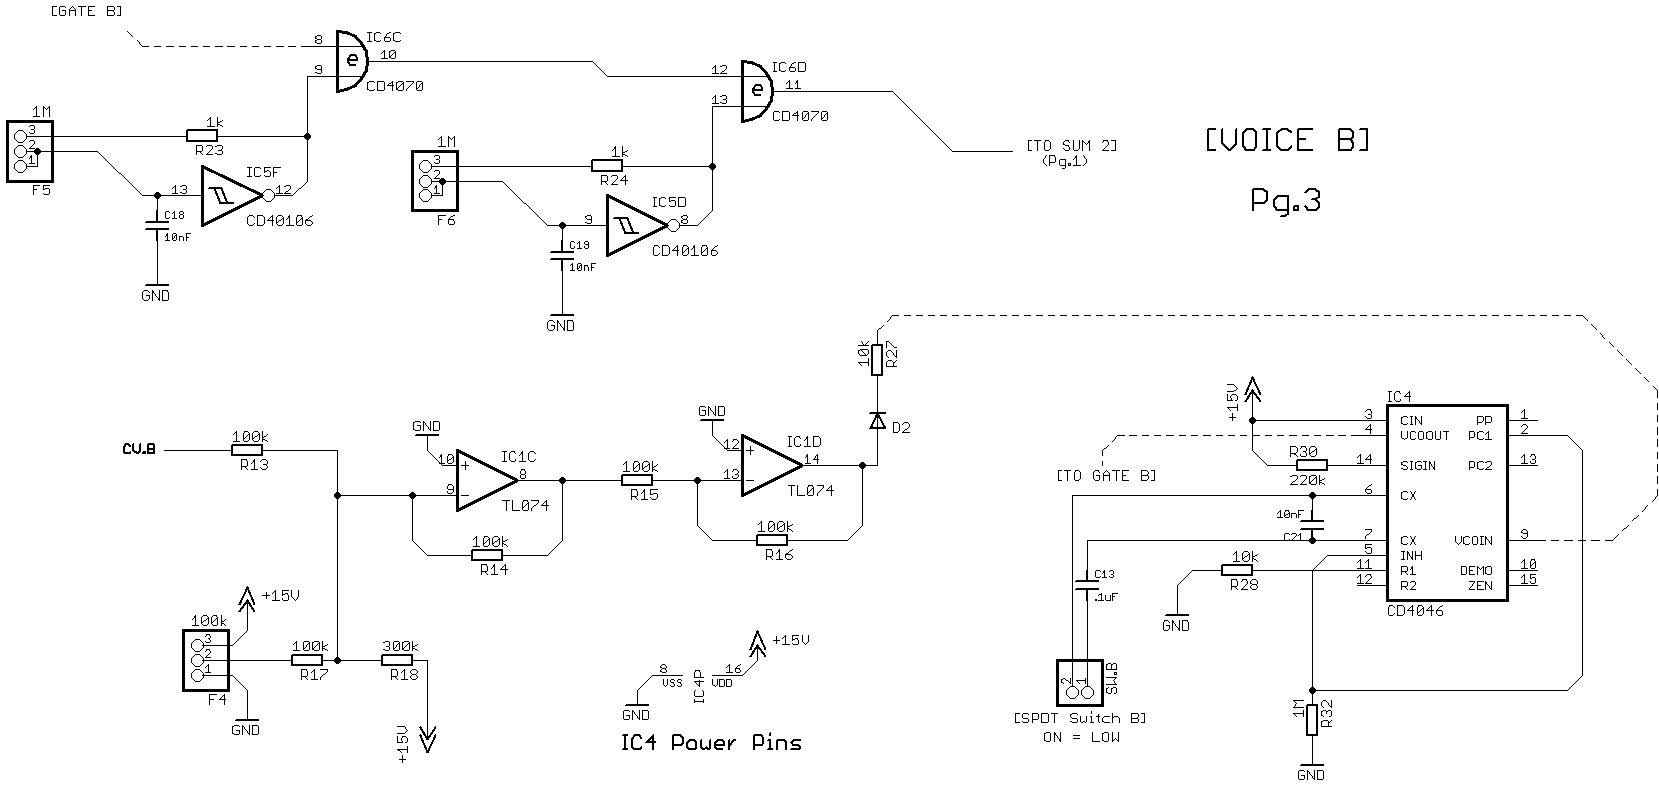 LHHv14_schematic_pg3.png